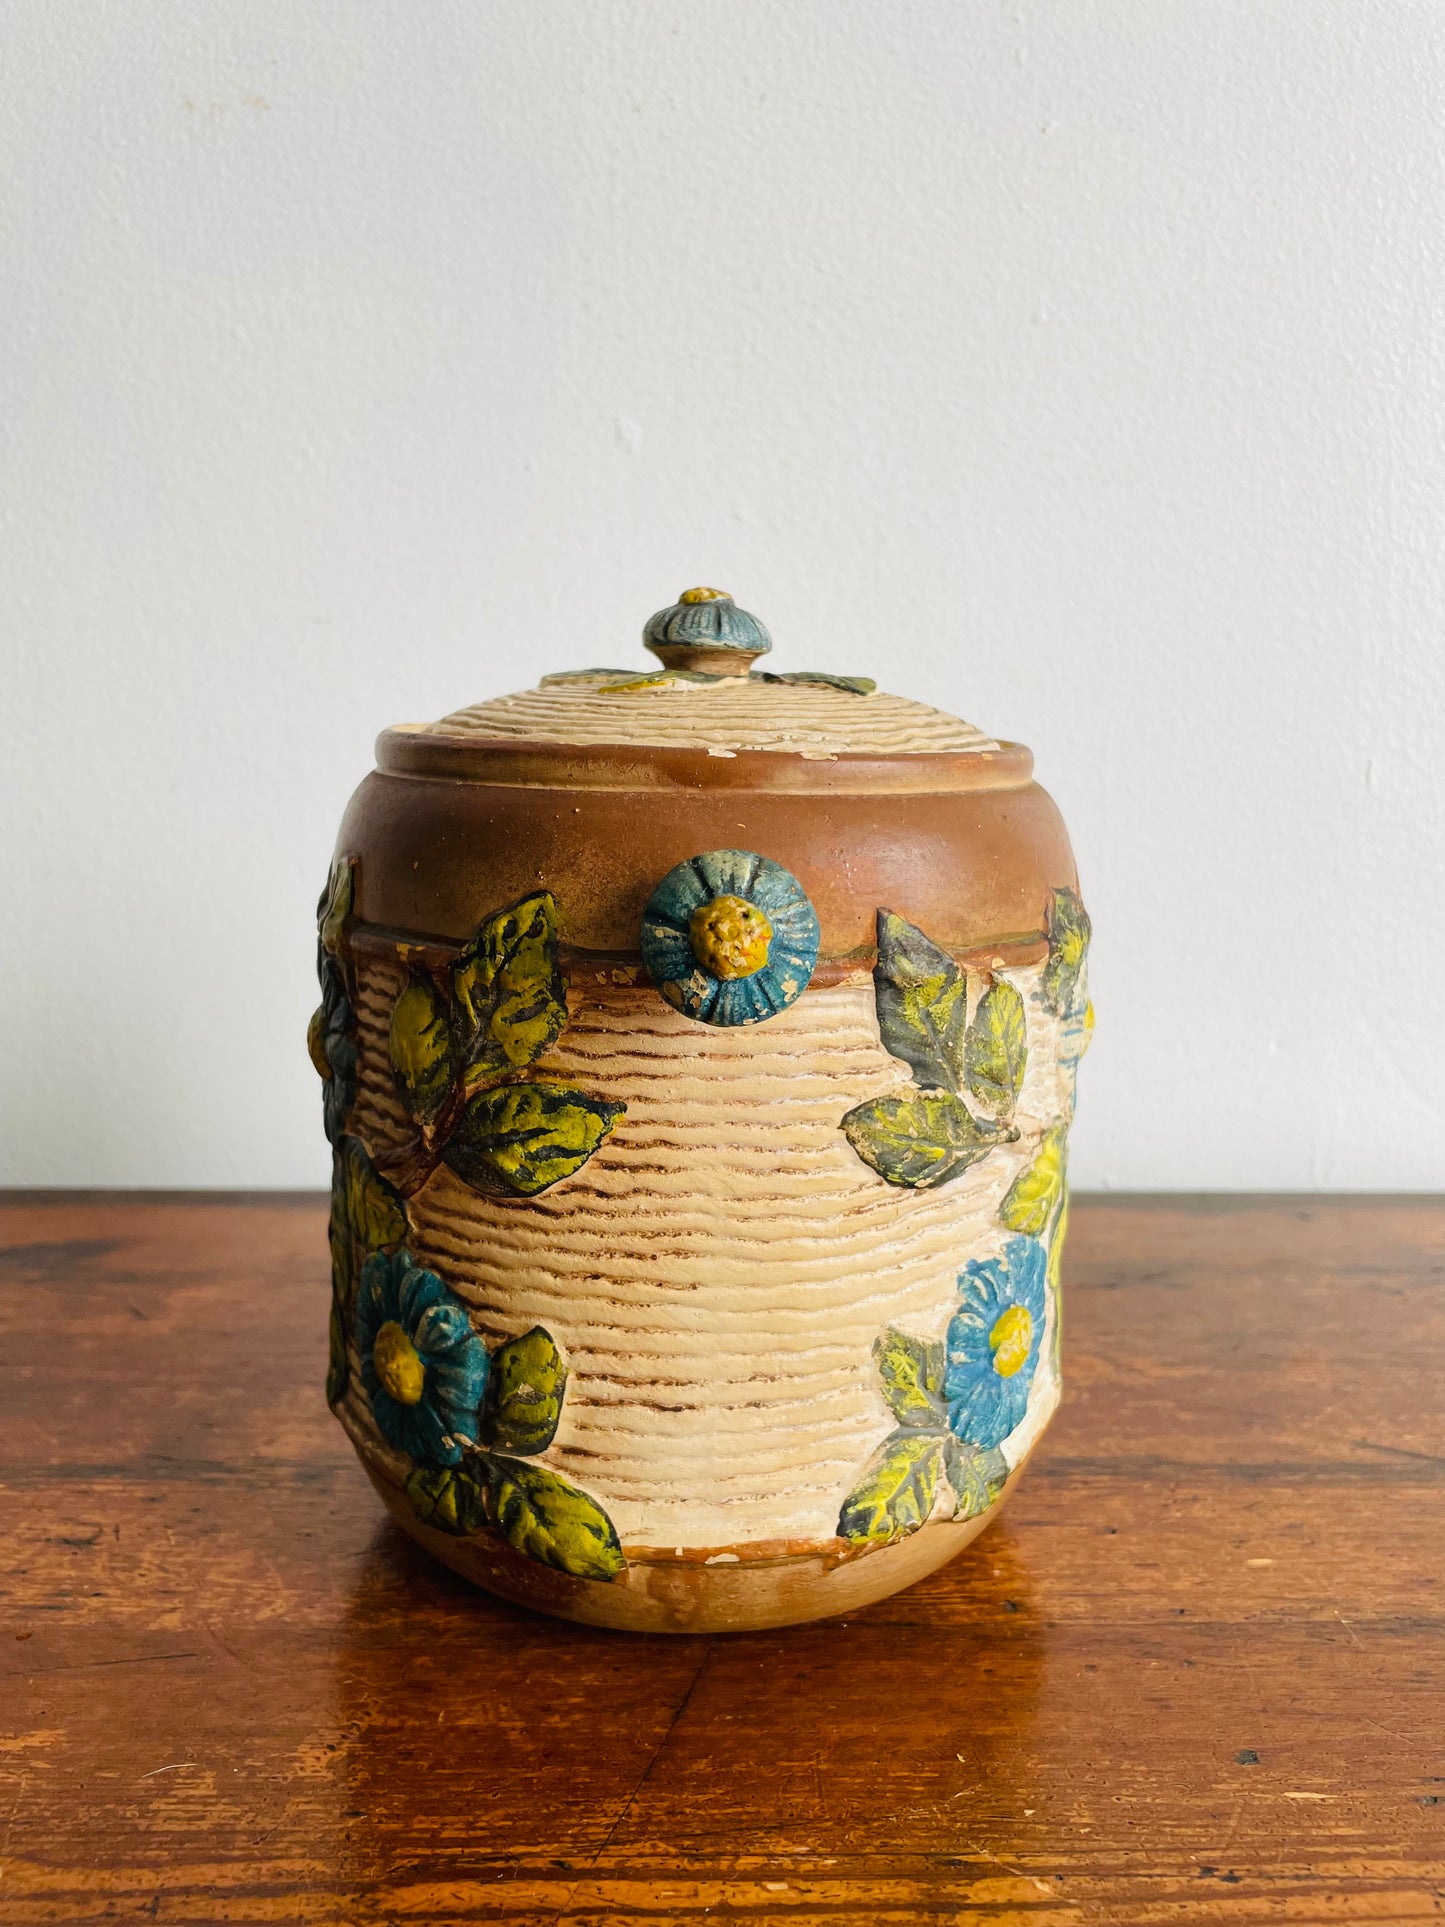 Ceramic Clay Biscuit Cookie Jar Canister with Lid & Floral Design - Made in Czechoslovakia